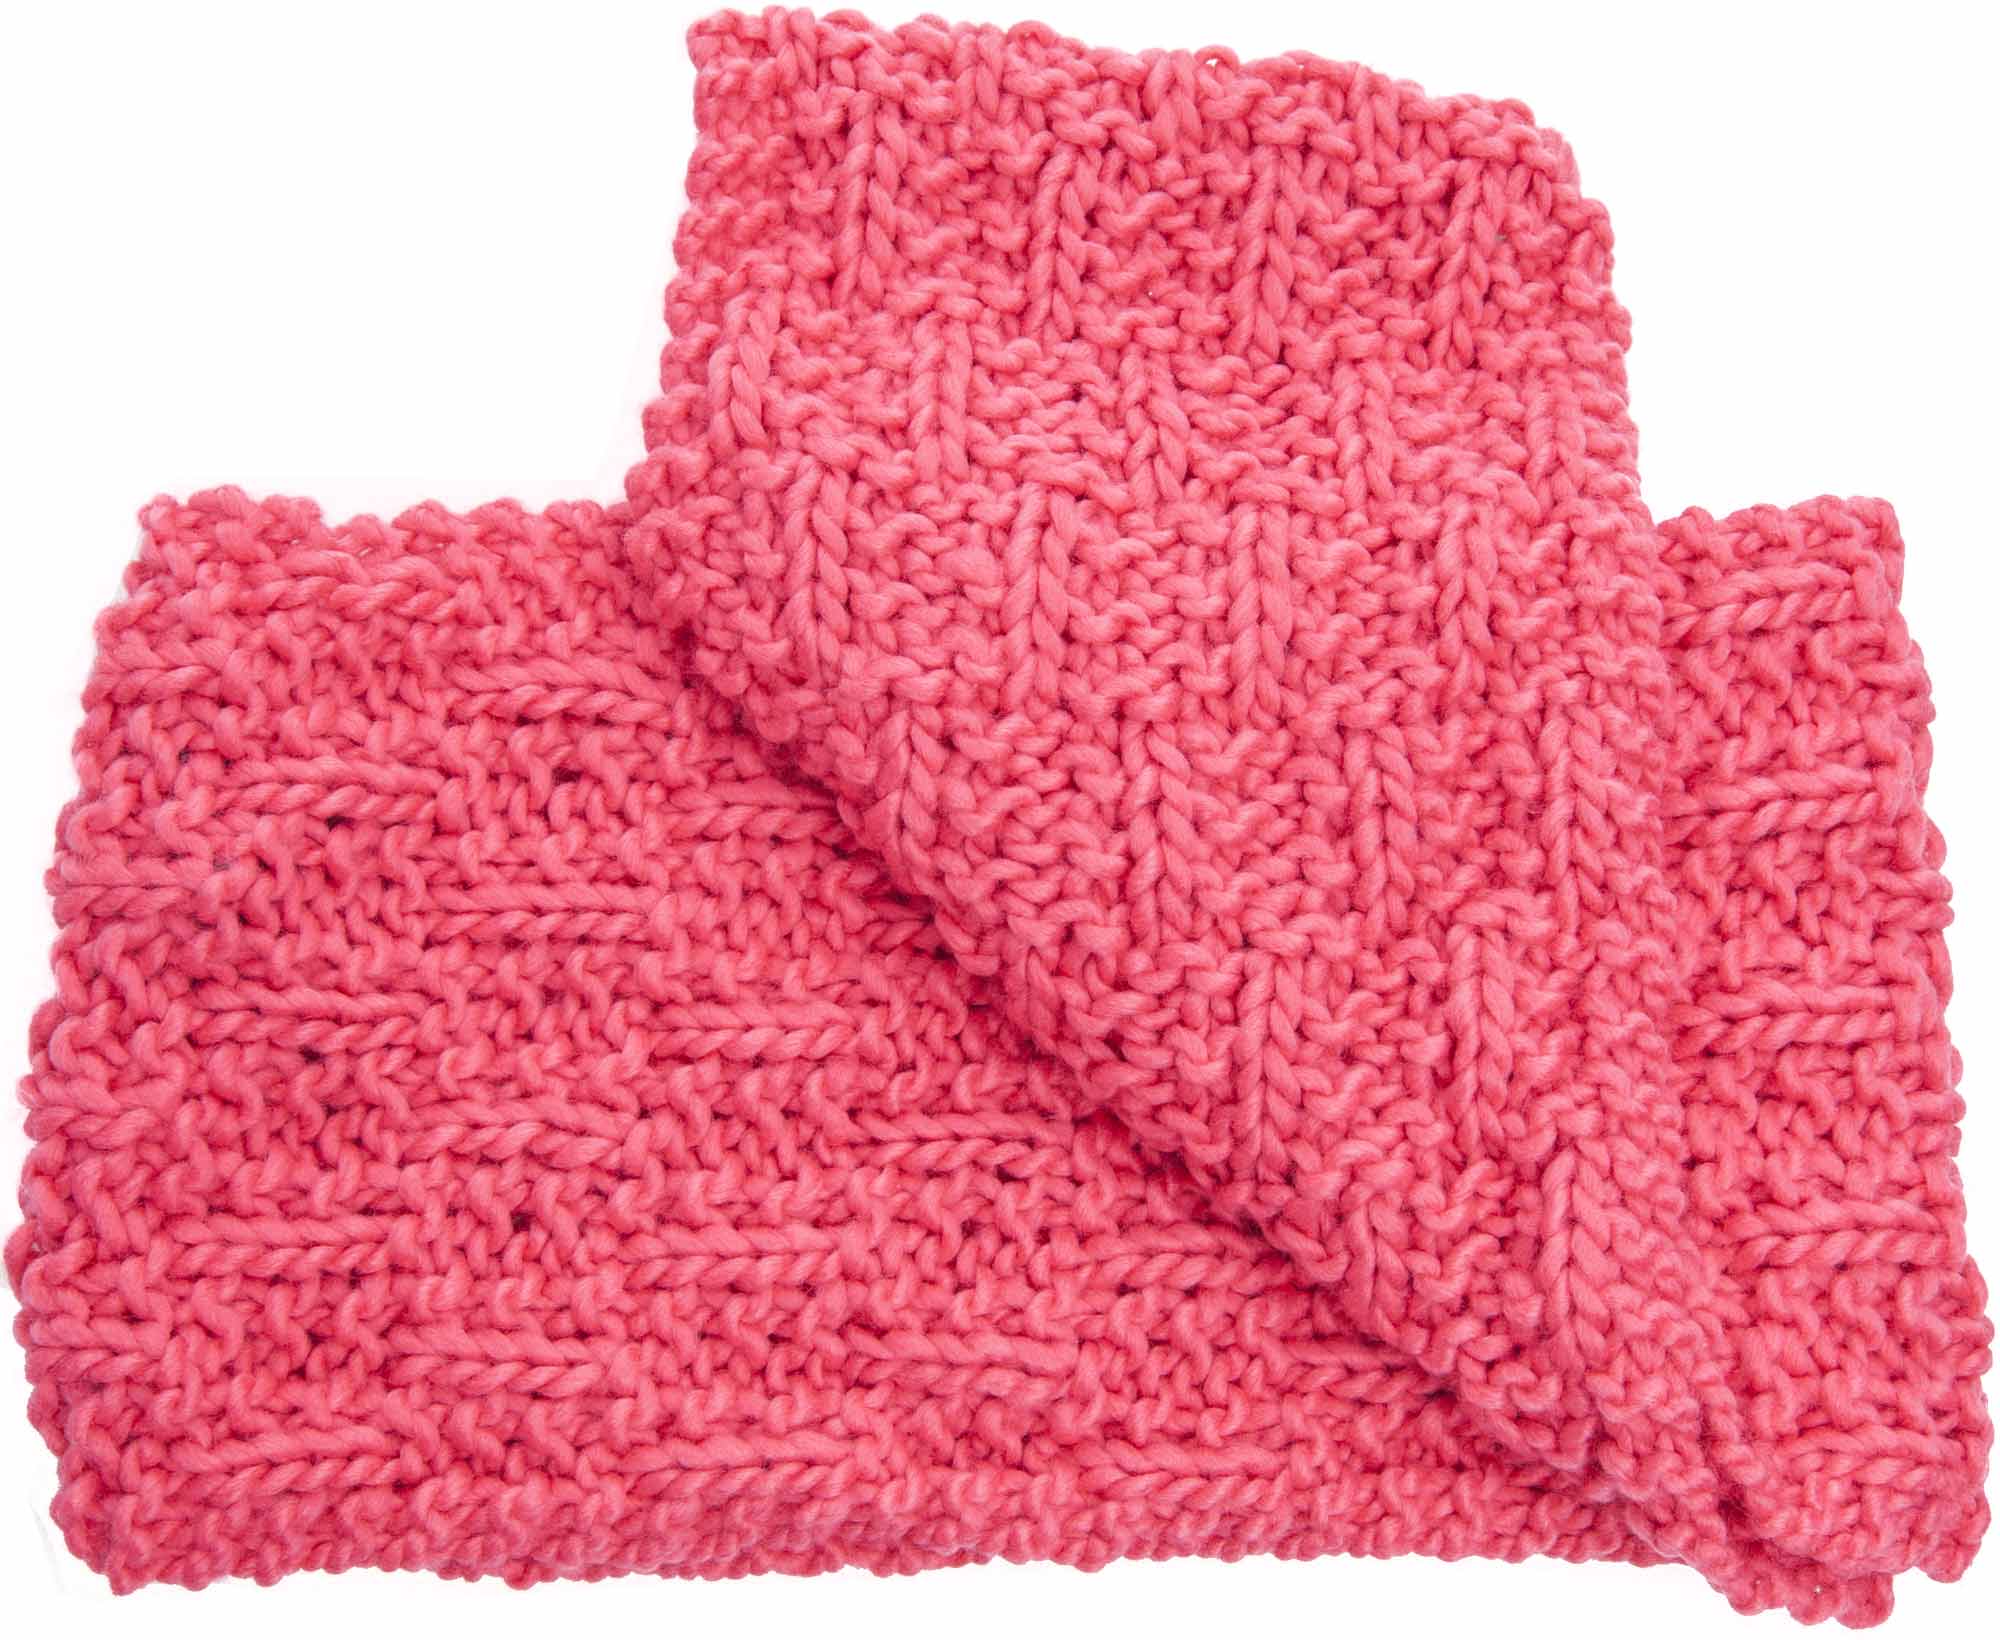 Women’s knitted scarf.